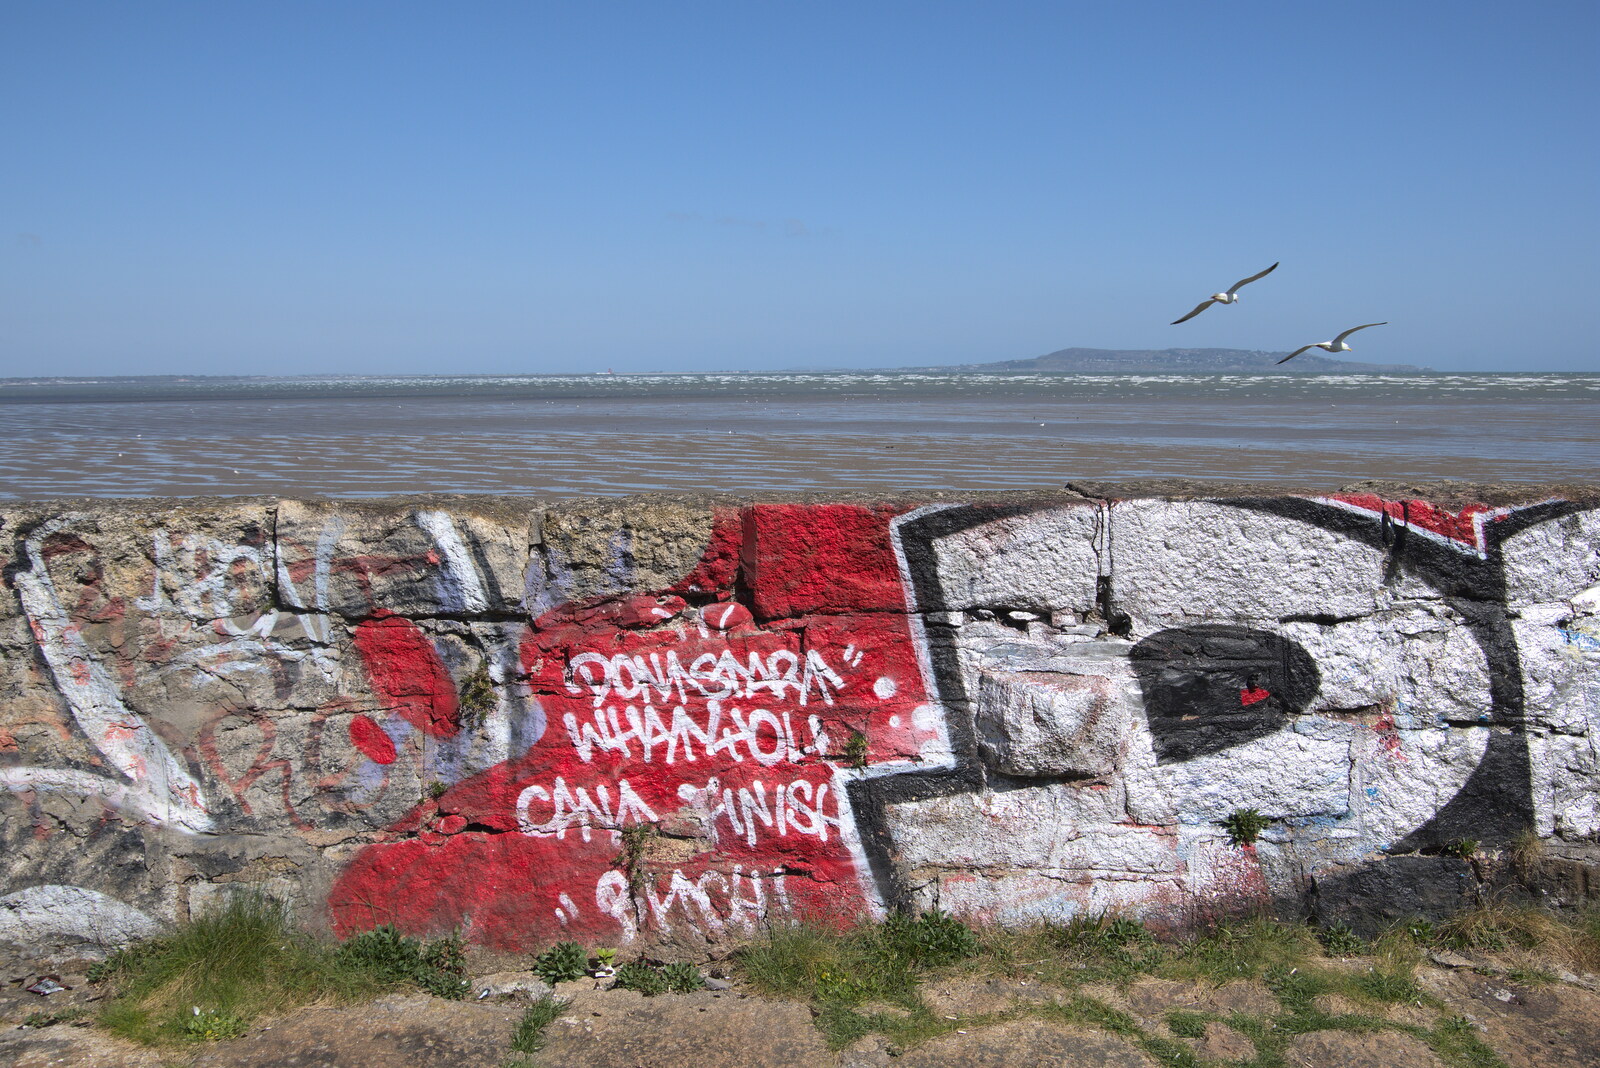 Blackrock North and South, Louth and County Dublin, Ireland - 23rd April 2022: Red and White tagging